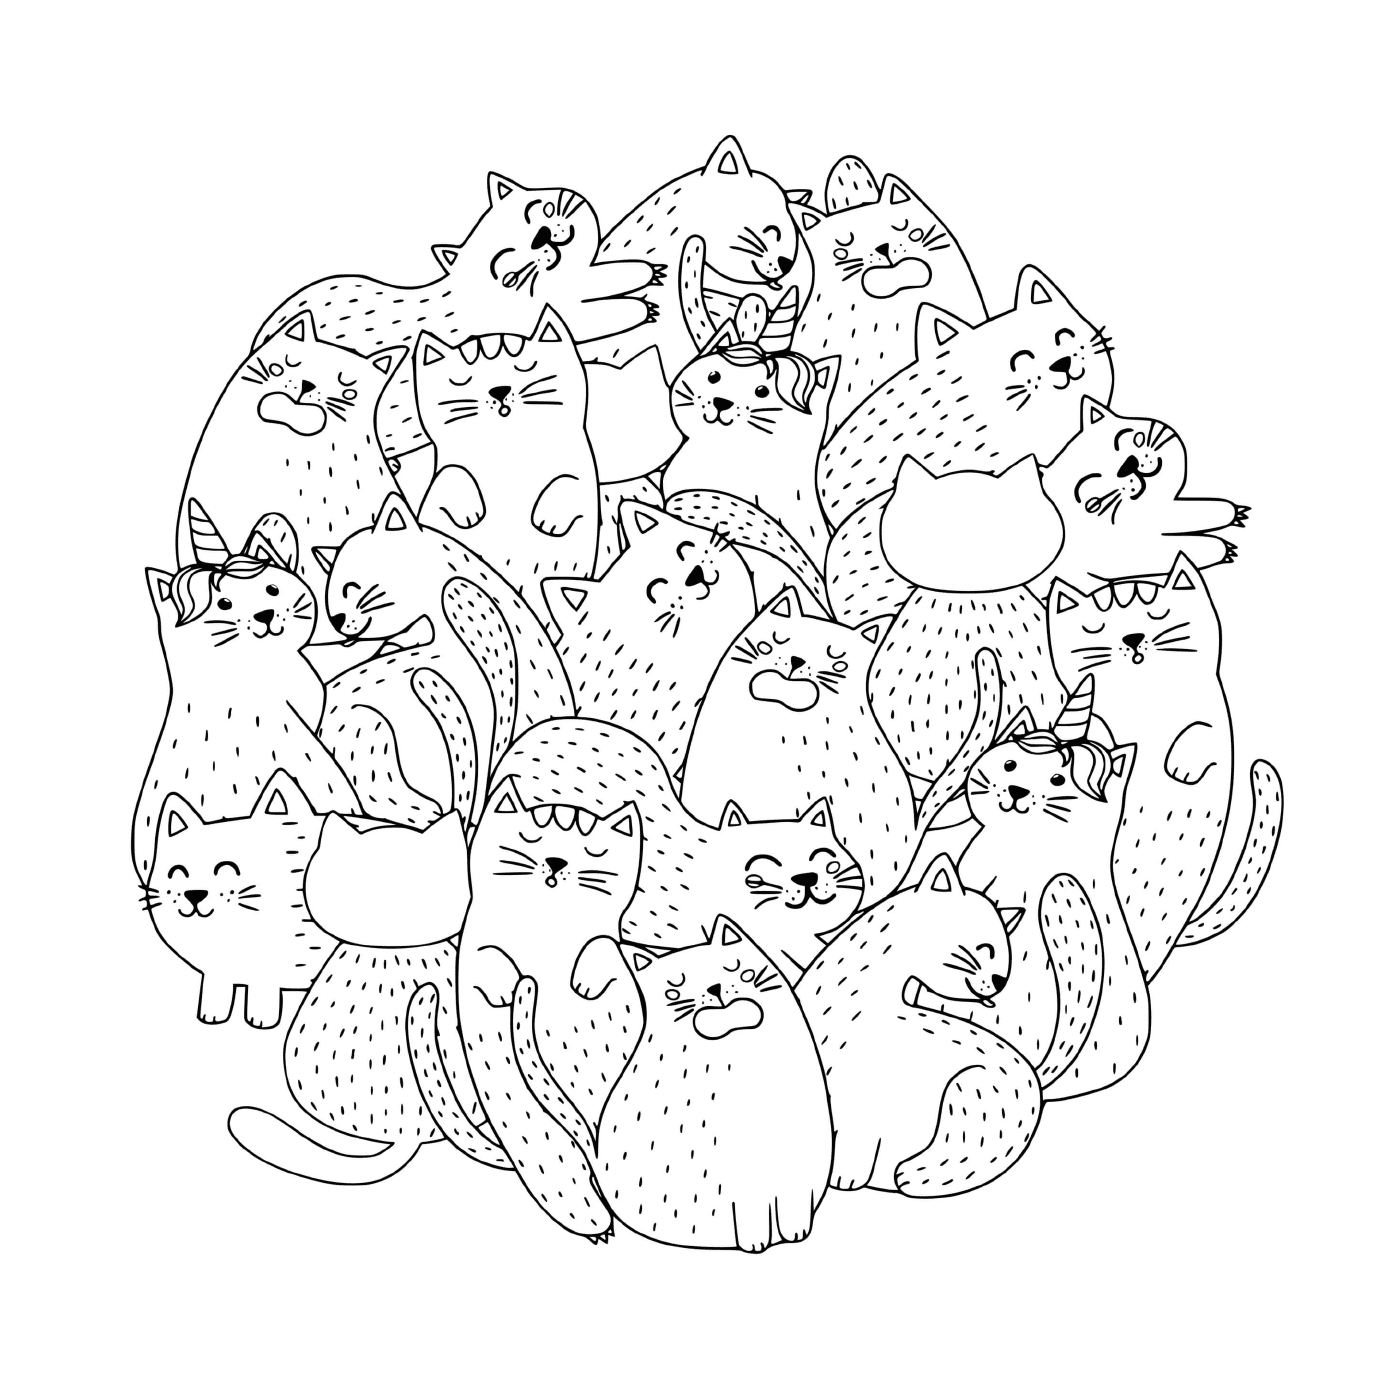  A big ball of cats, kittens and adorable unicorn 